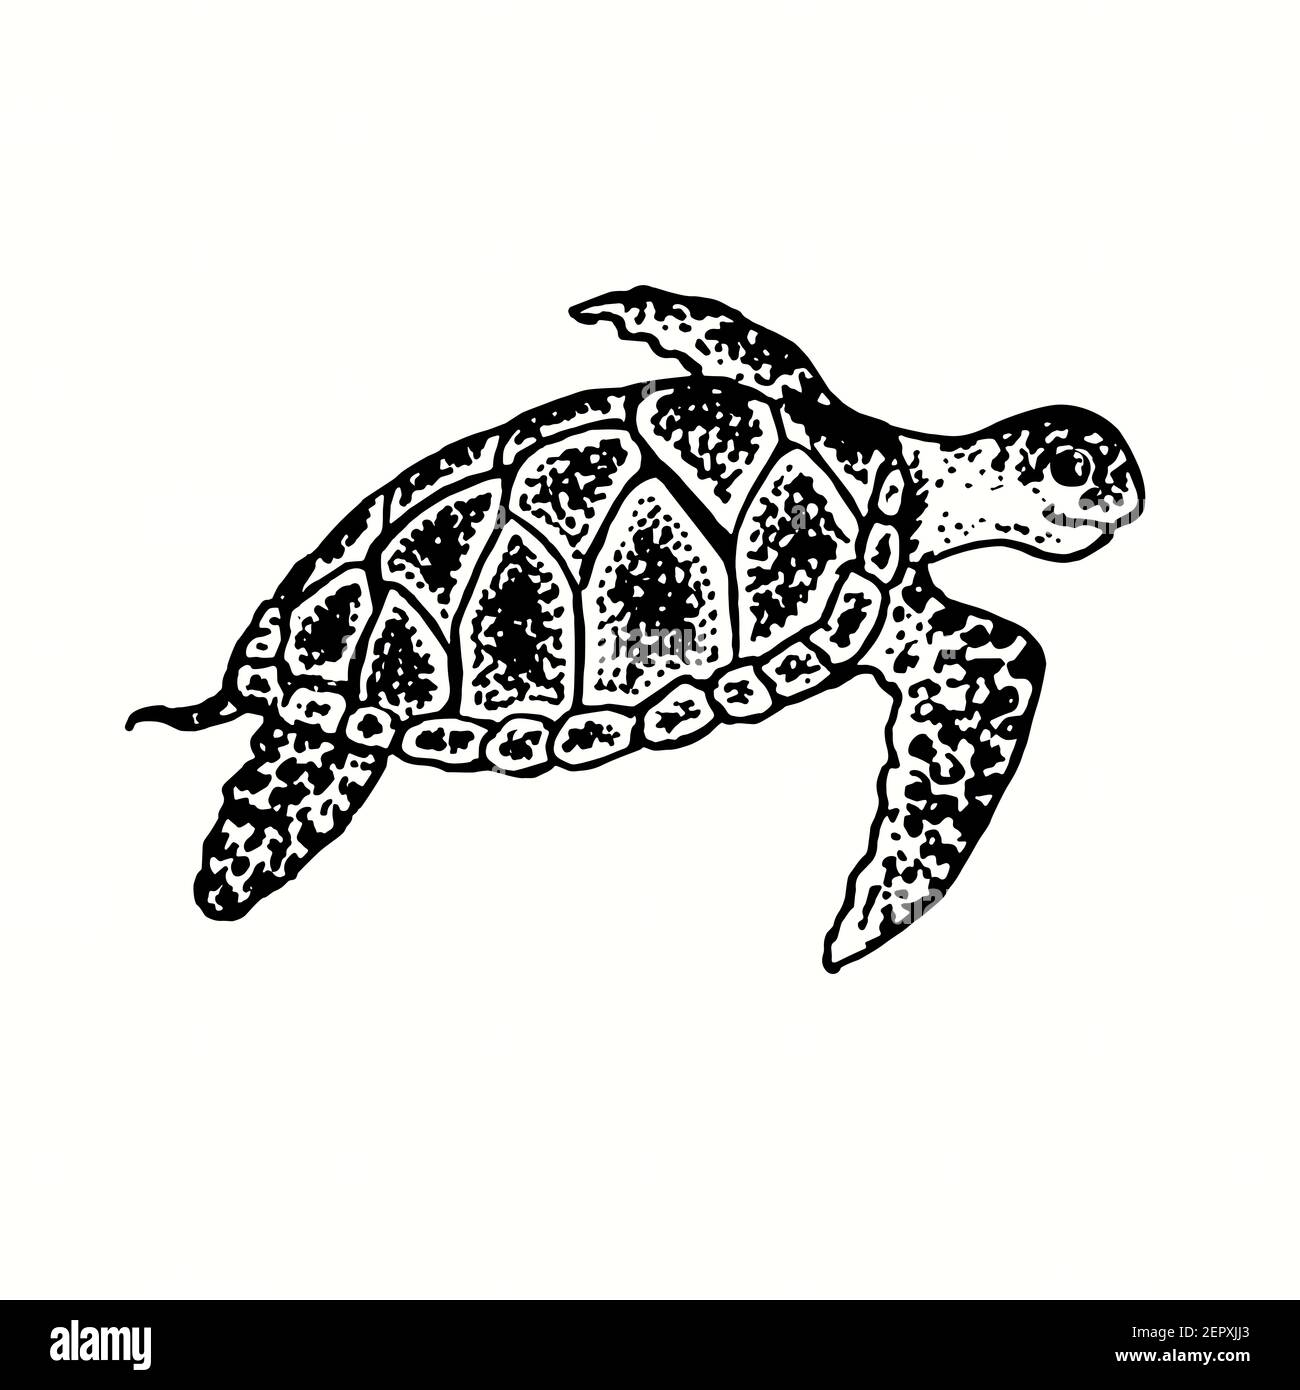 Sea turtle Chelonioidea, marine turtle side view. Ink black and white doodle drawing in woodcut outline style. Stock Photo